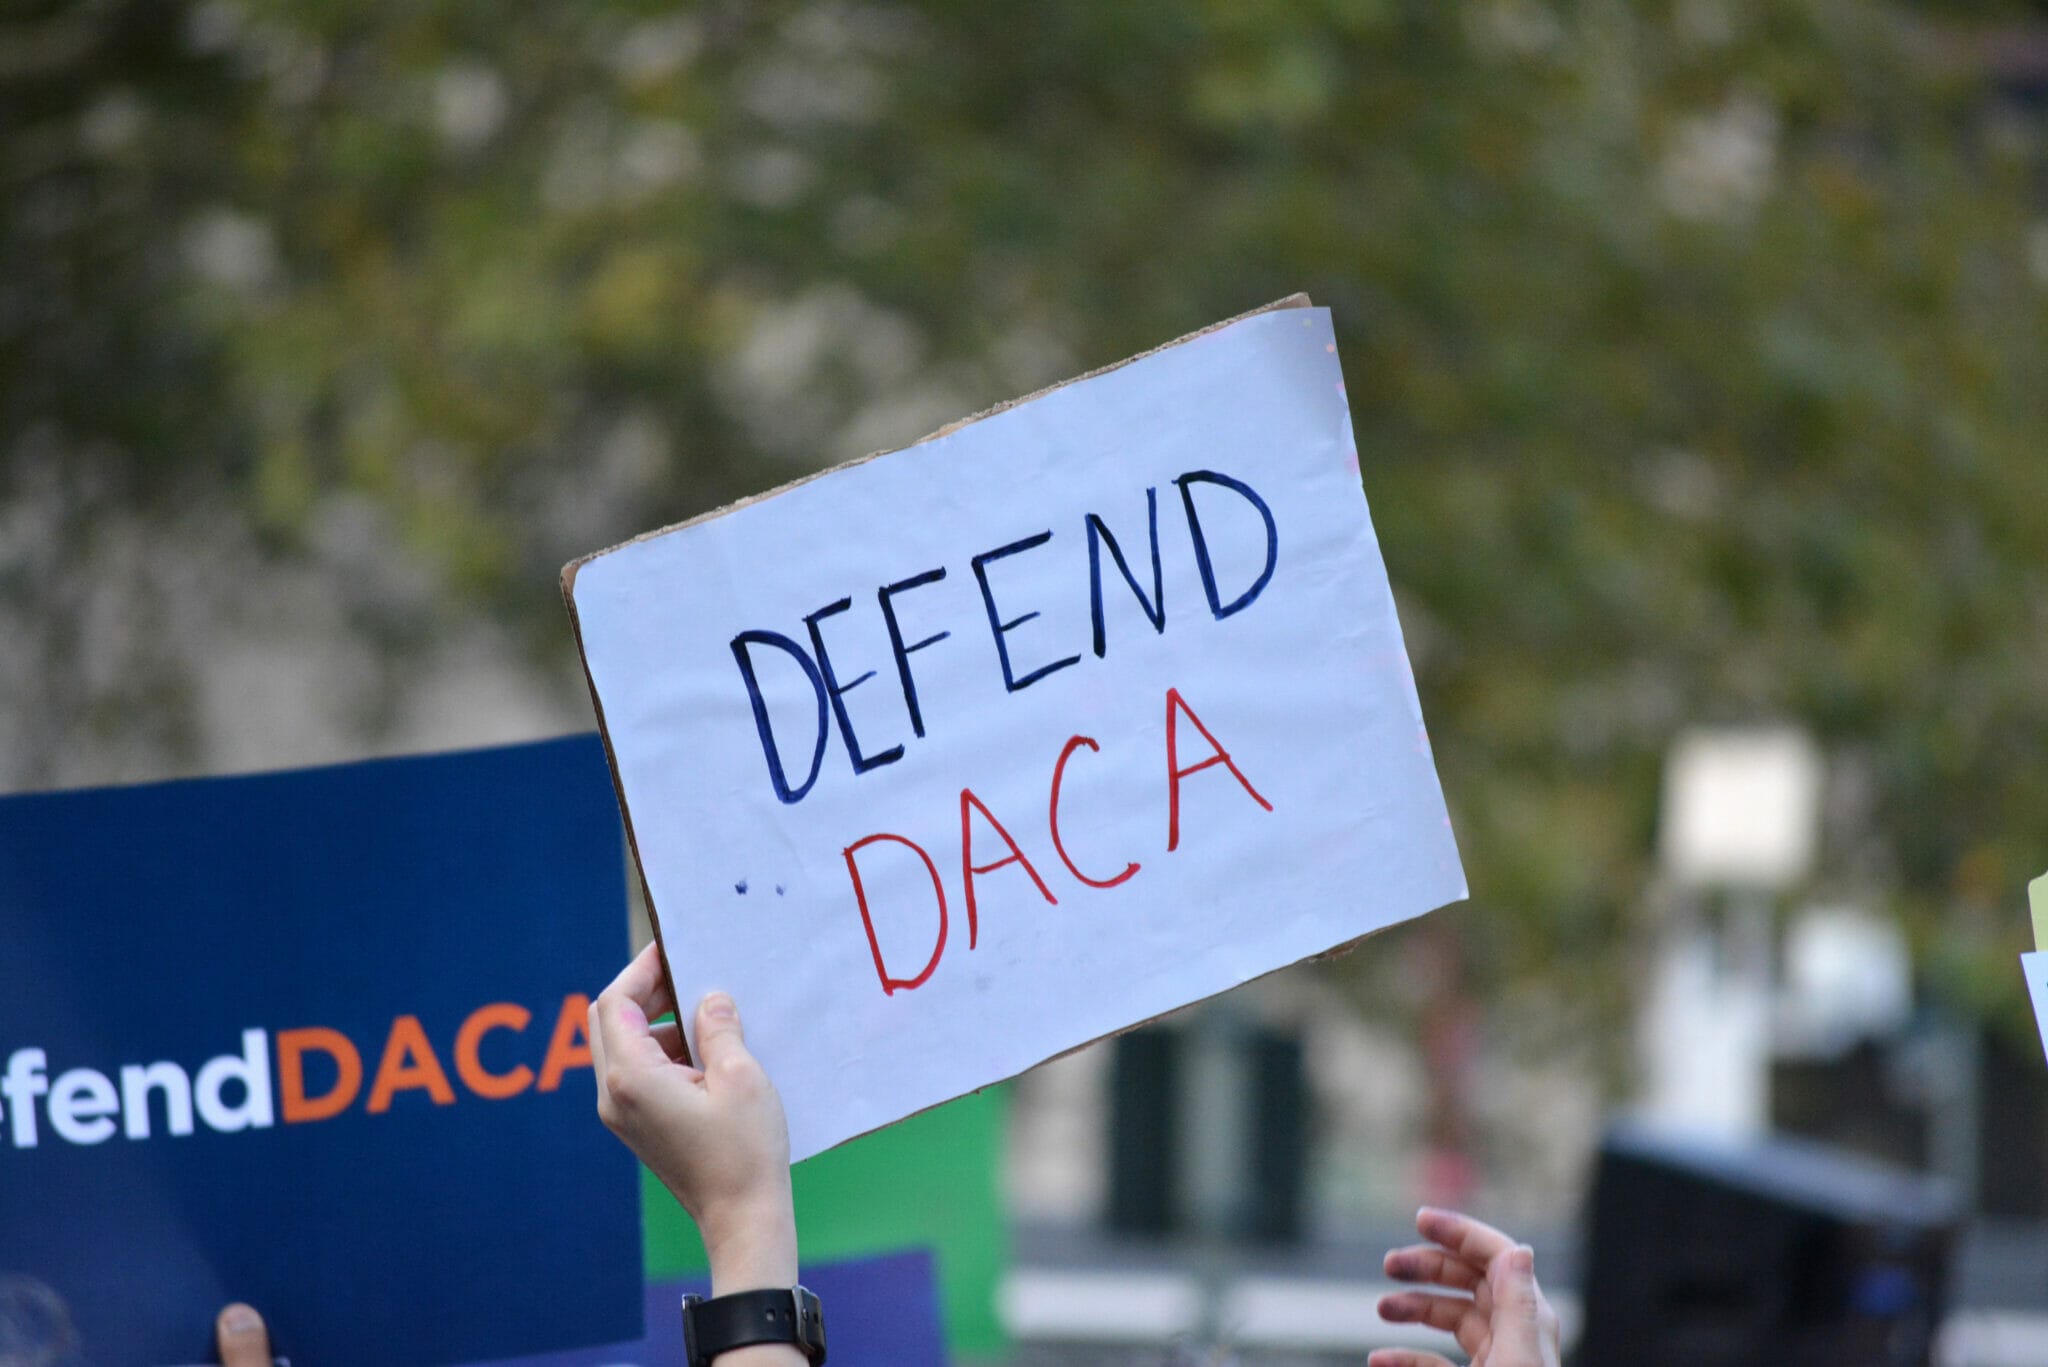 Nearly 200 New DACA Applications Approved Since November